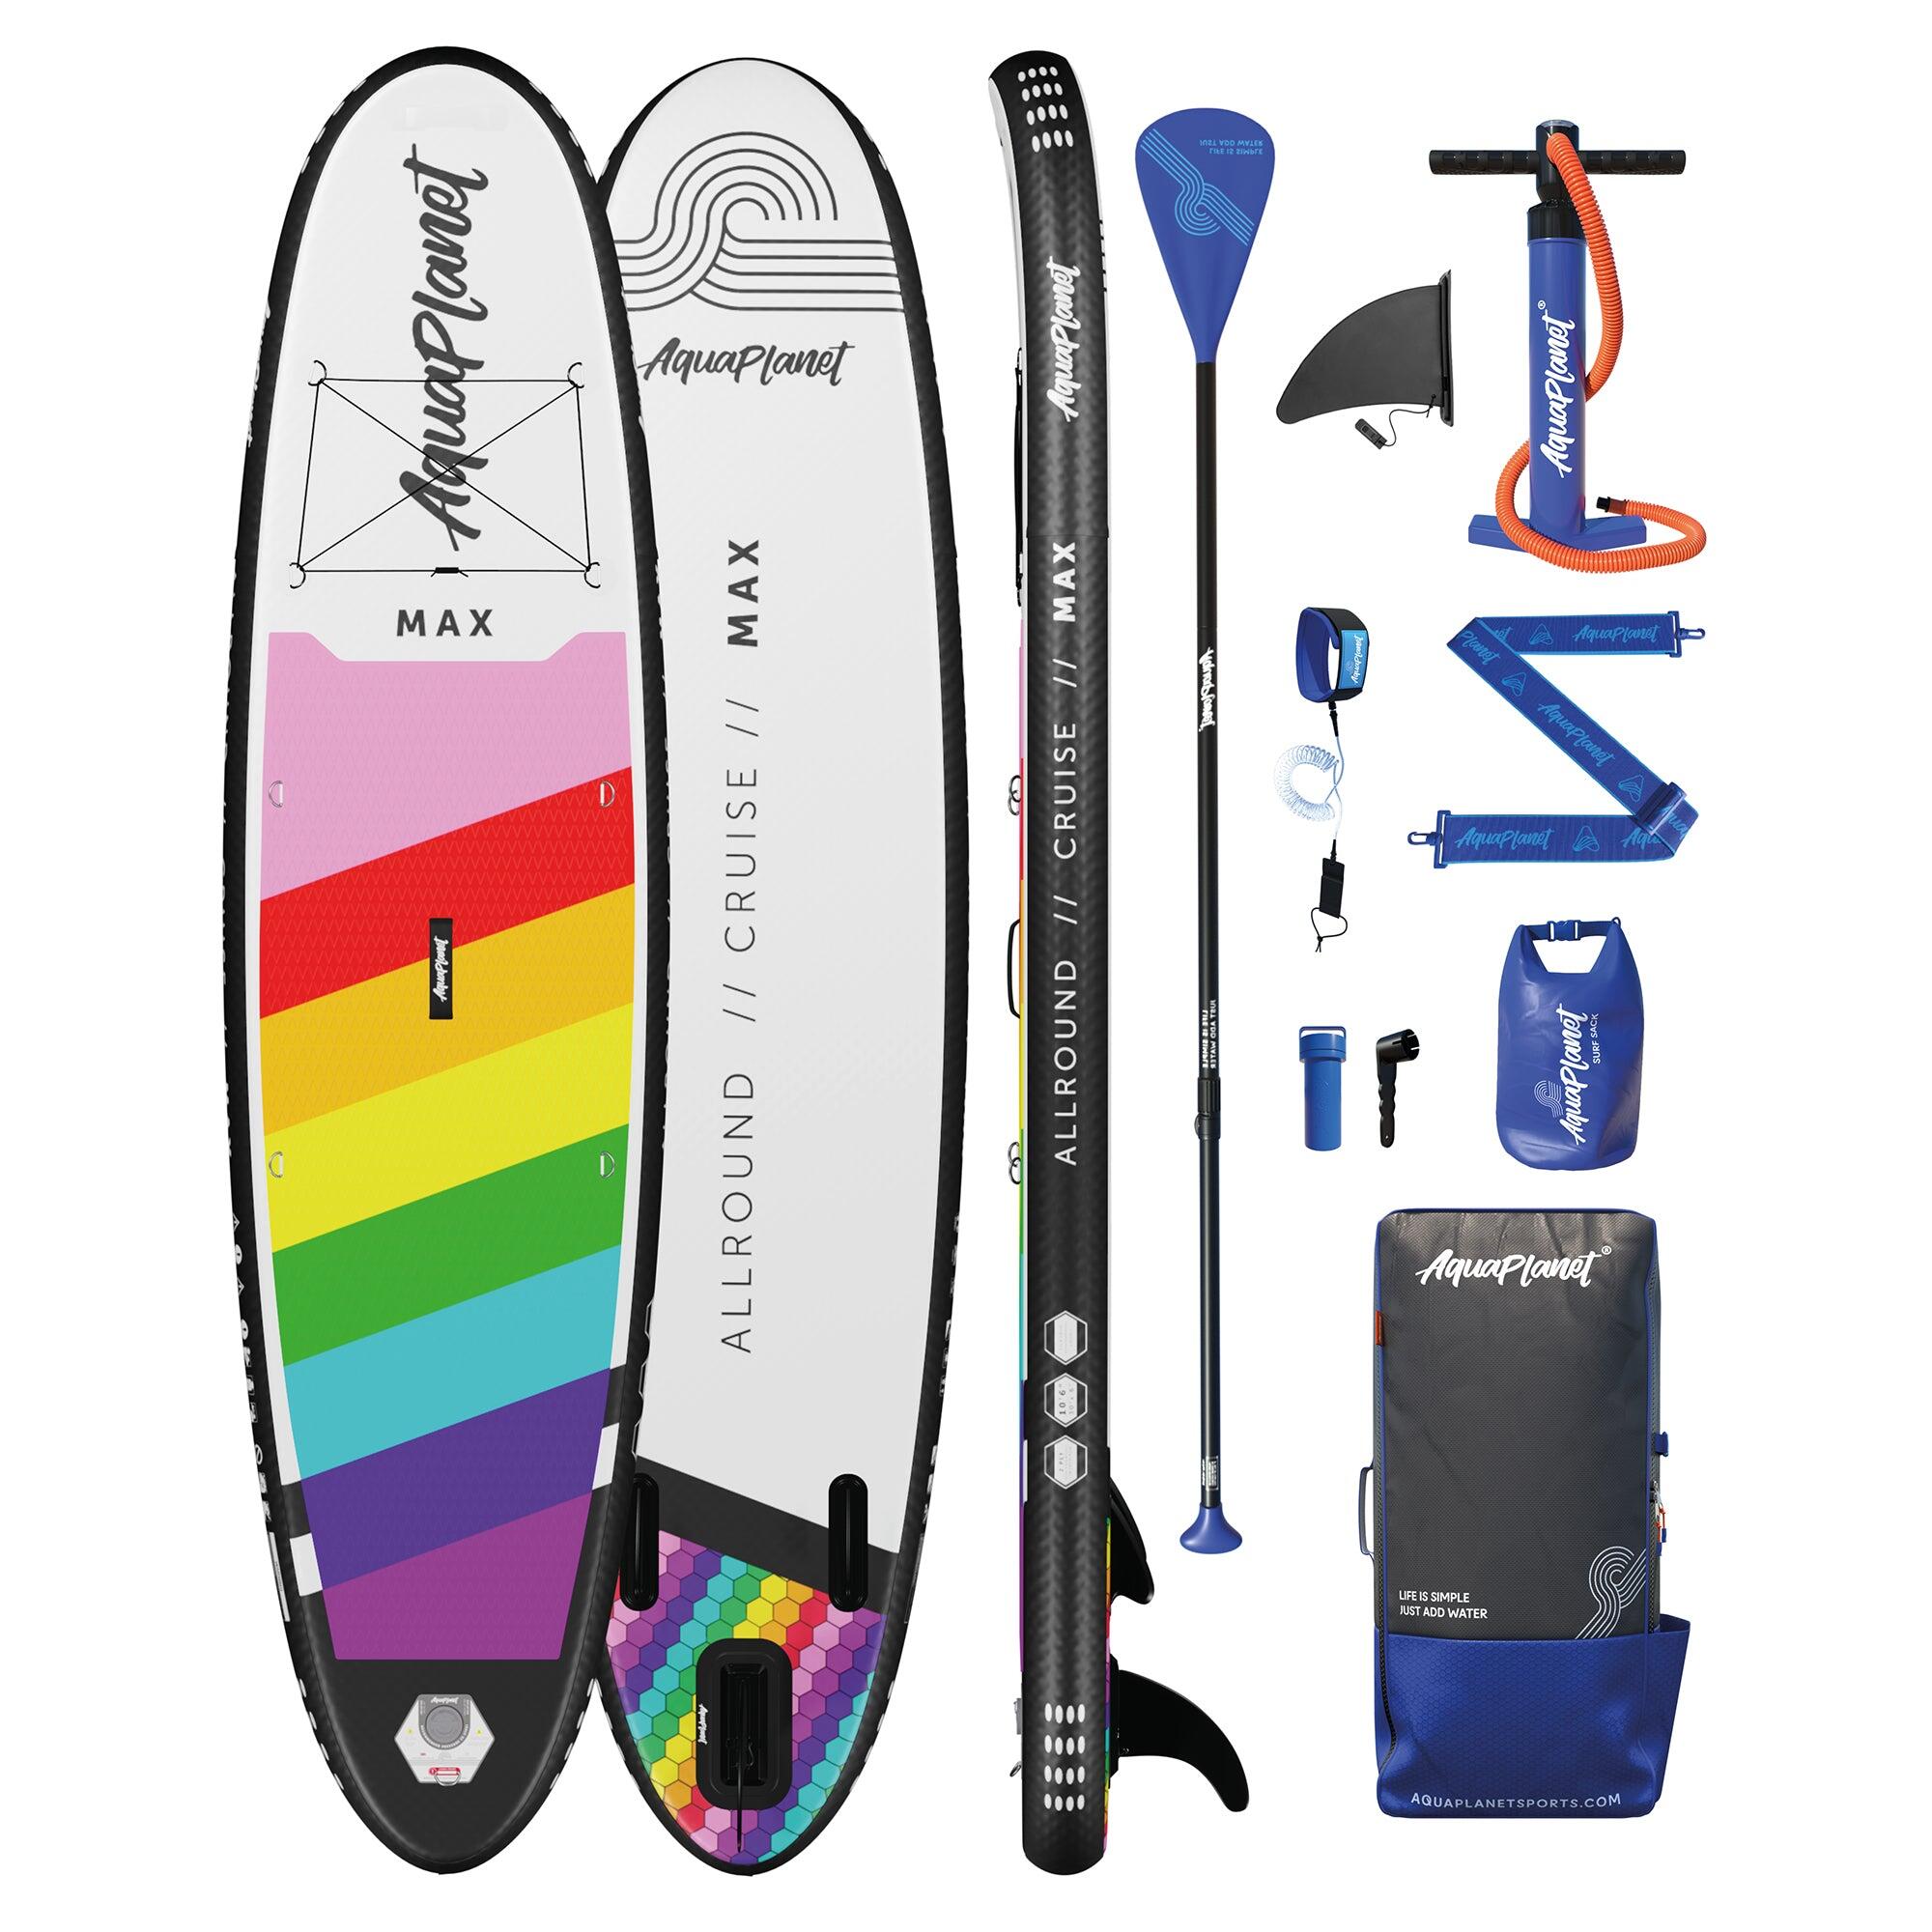 AQUAPLANET Aquaplanet MAX 10'6 Inflatable Paddle Board Package - Rainbow